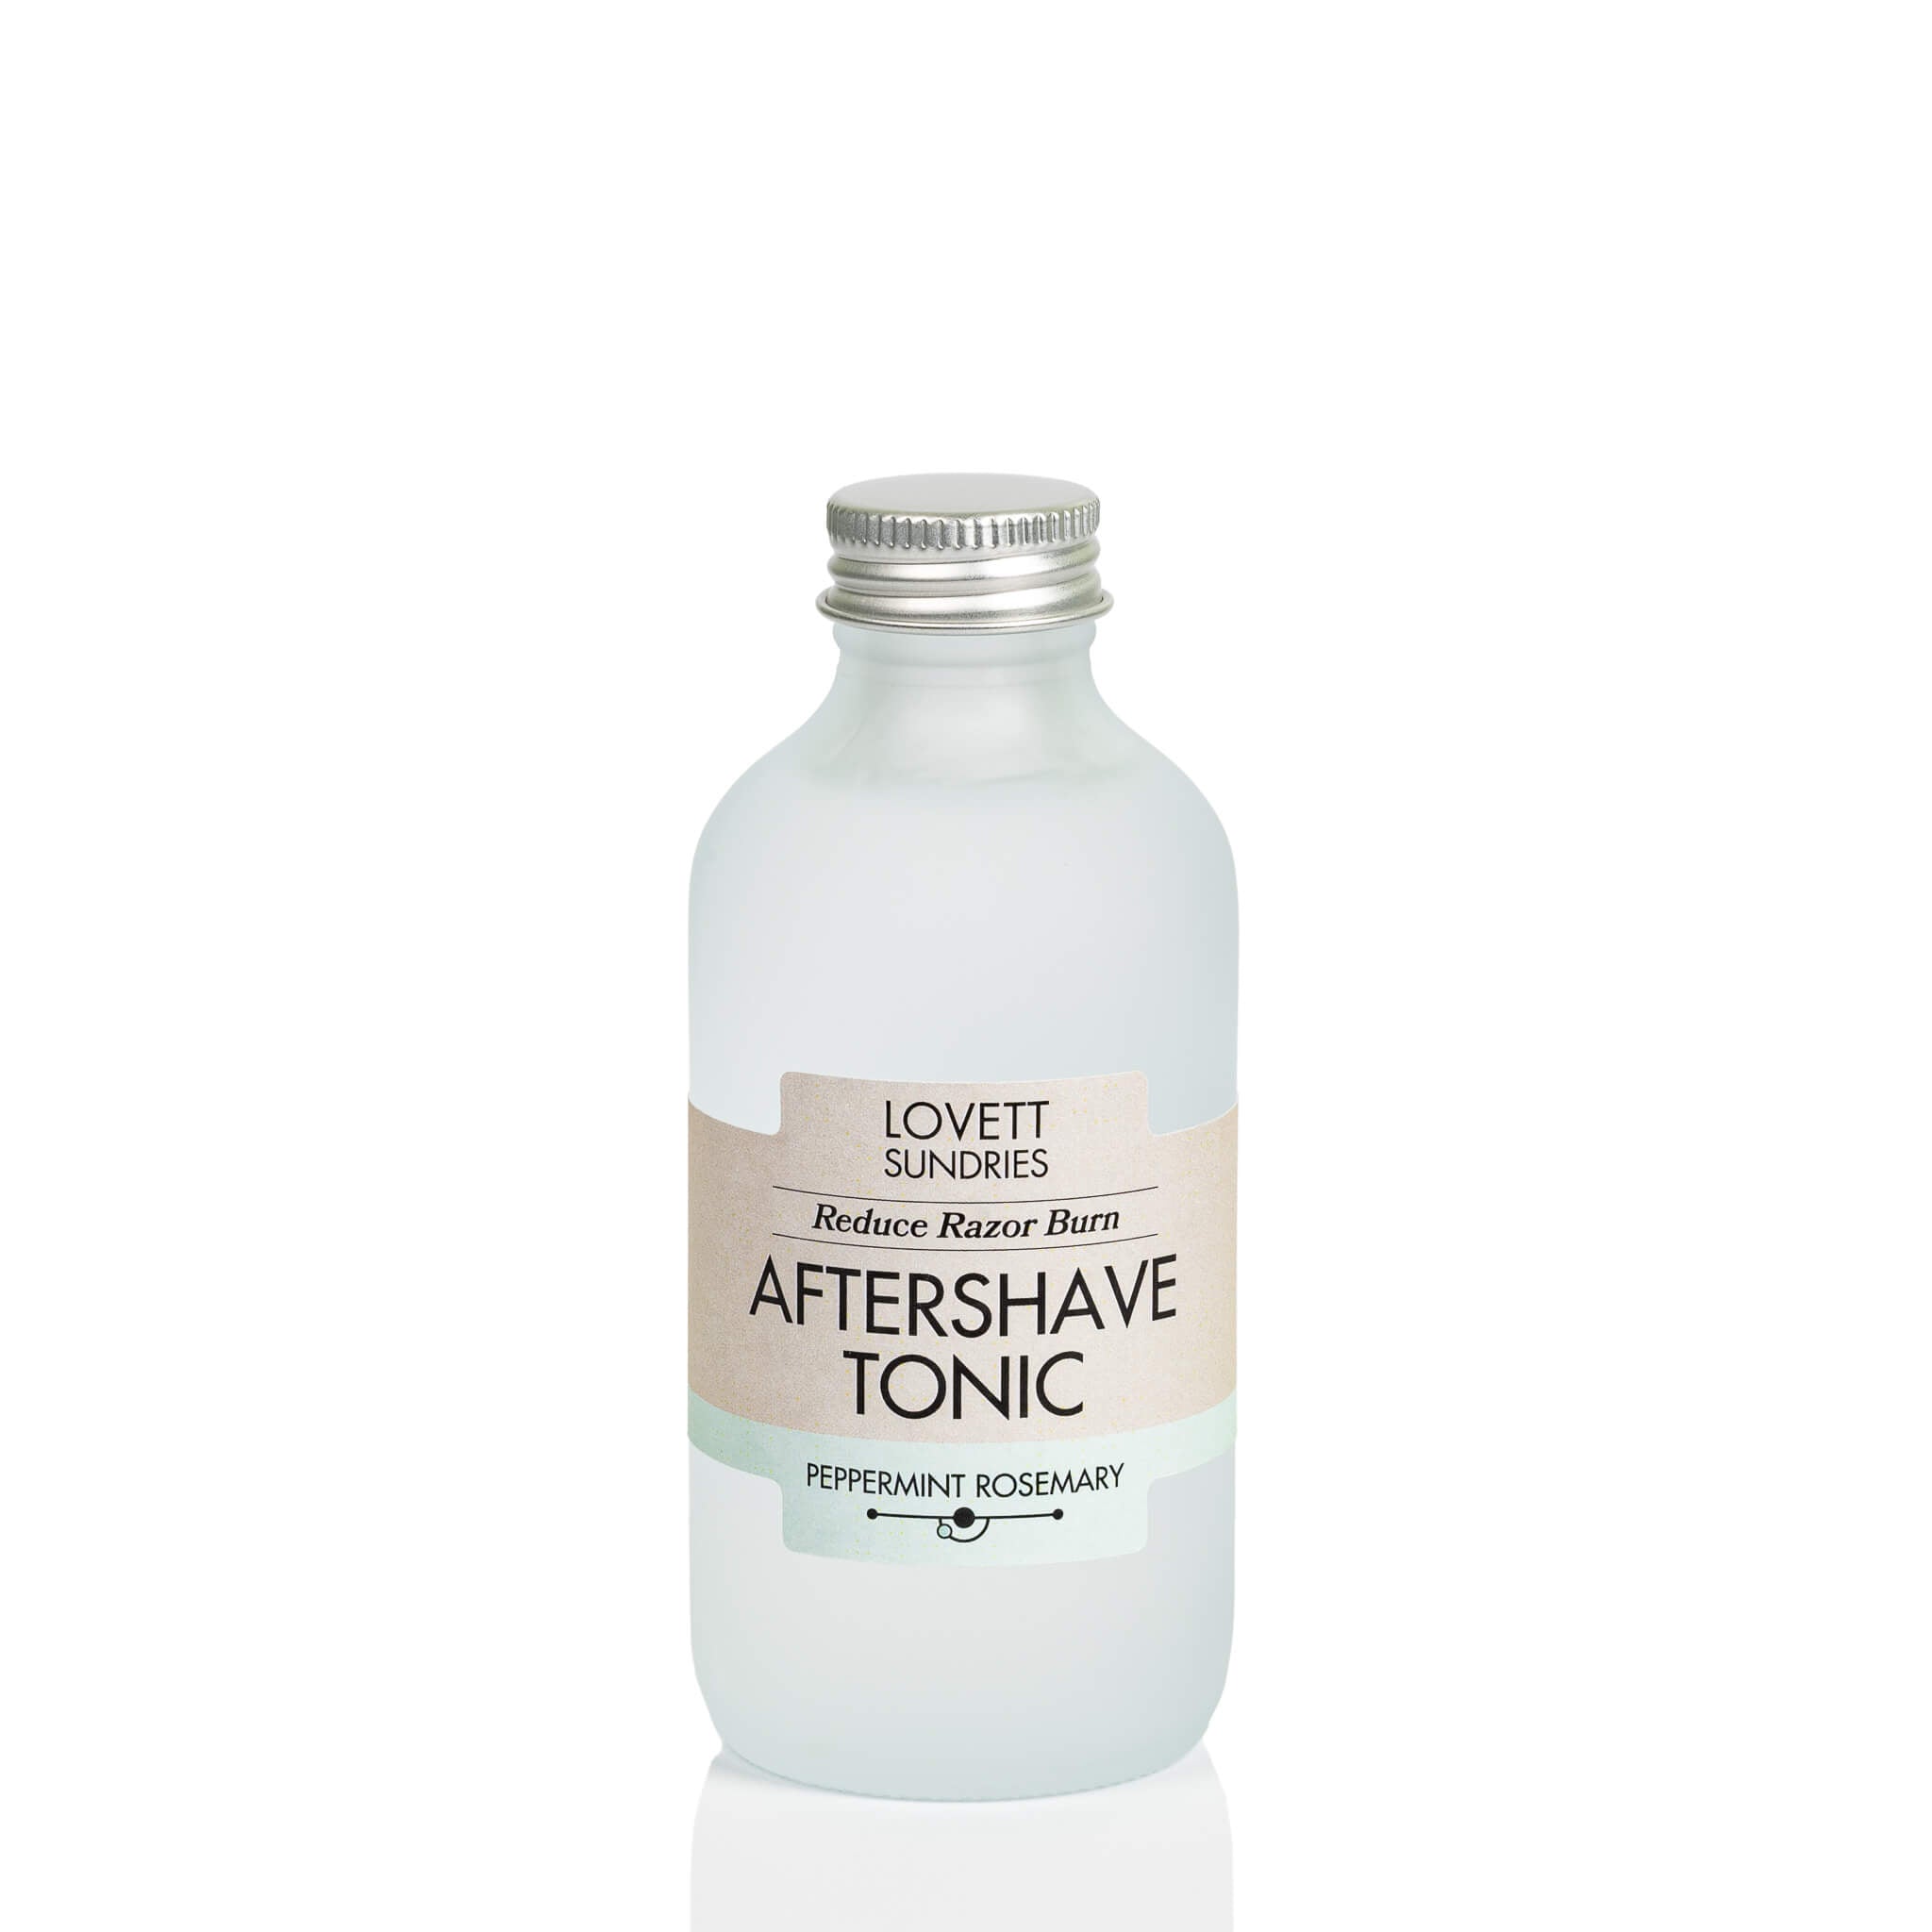 All natural peppermint rosemary scented aftershave tonic in a frosted glass bottle.